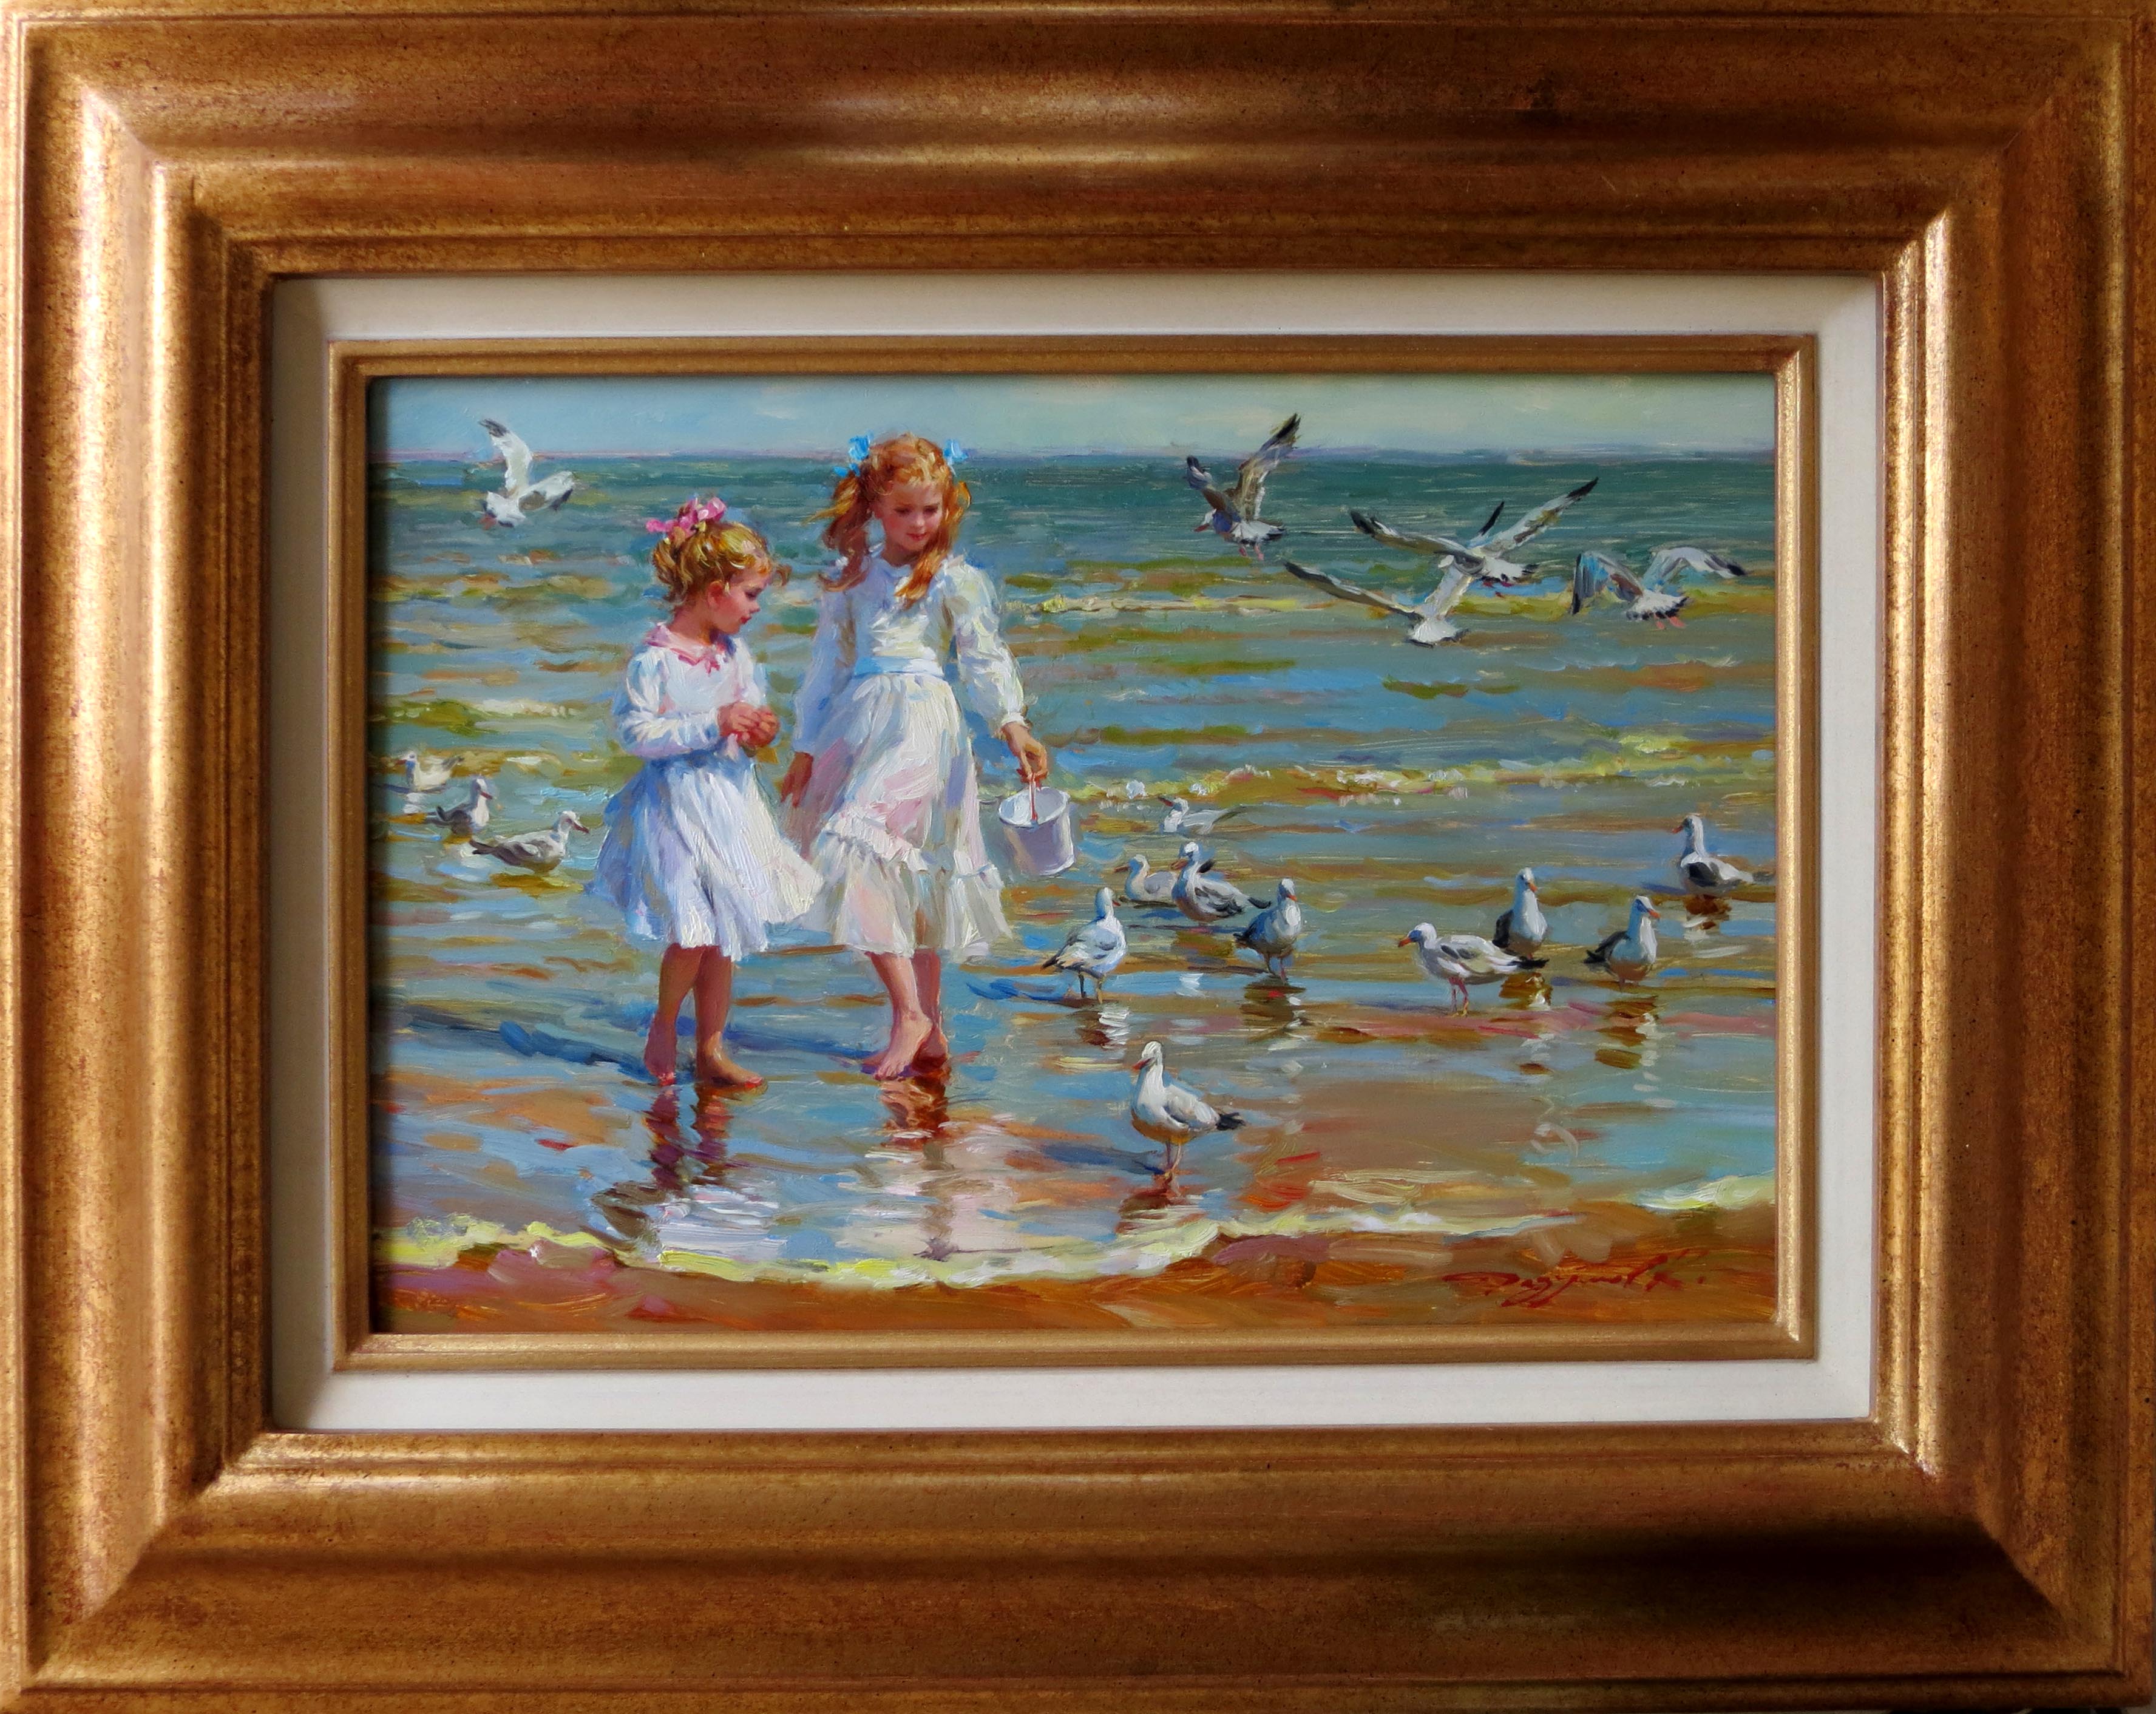 Konstantin Razumov (1974- ) Russian. "The Seagulls", Two Young Girls on a Beach, with Seagulls, - Image 2 of 5